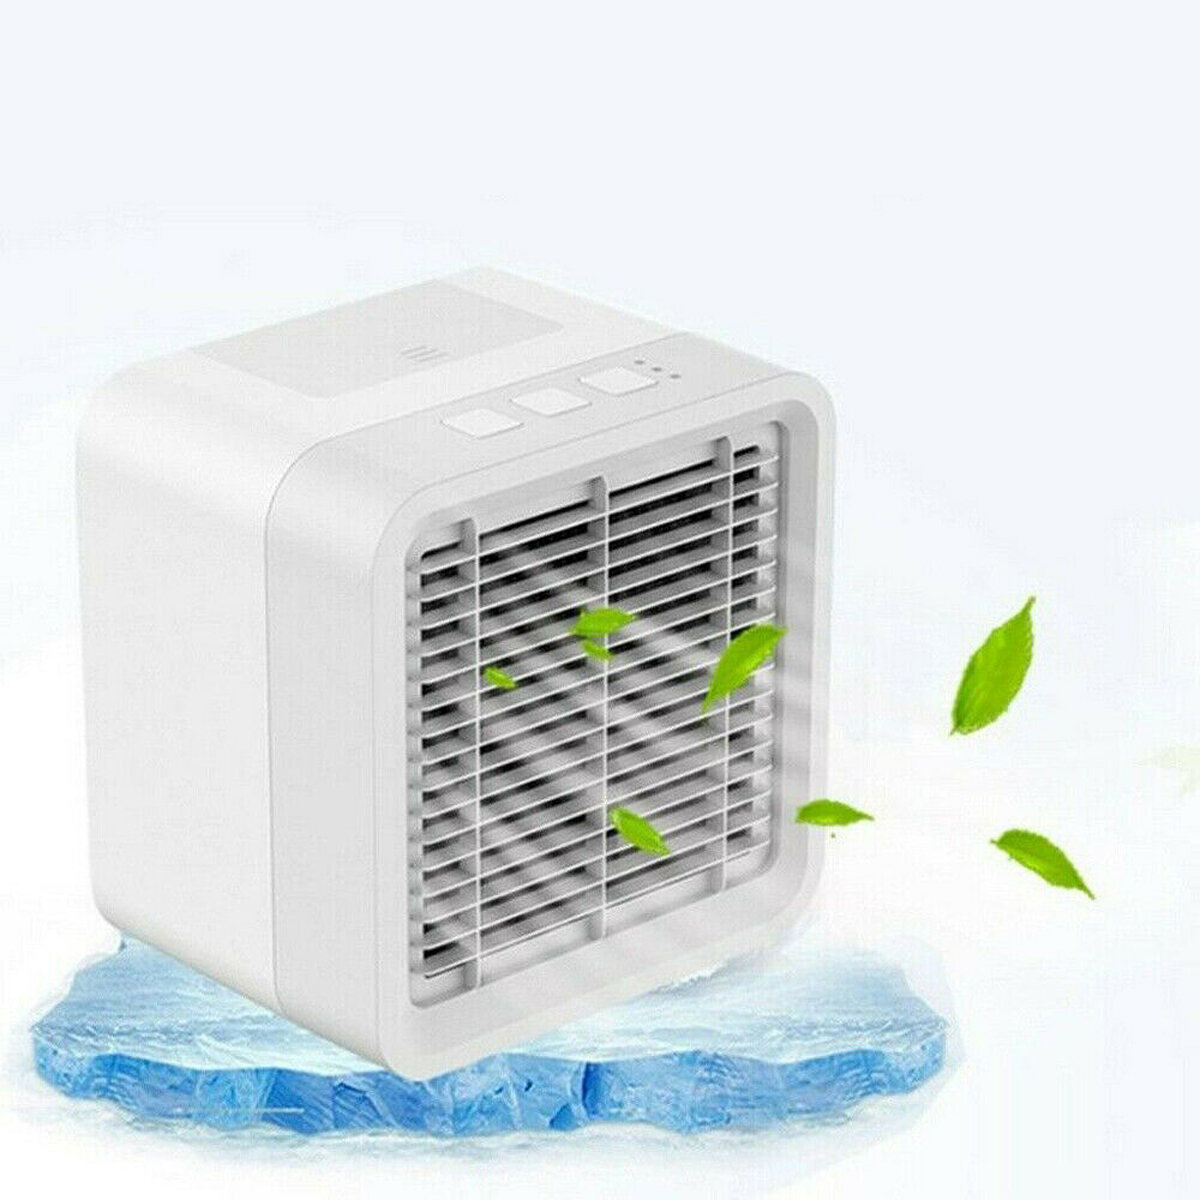 

USB Rechargeable Mini Air Conditioner 3 Gears Low Noise Cold Air Cooling Fan Cooler Purifier